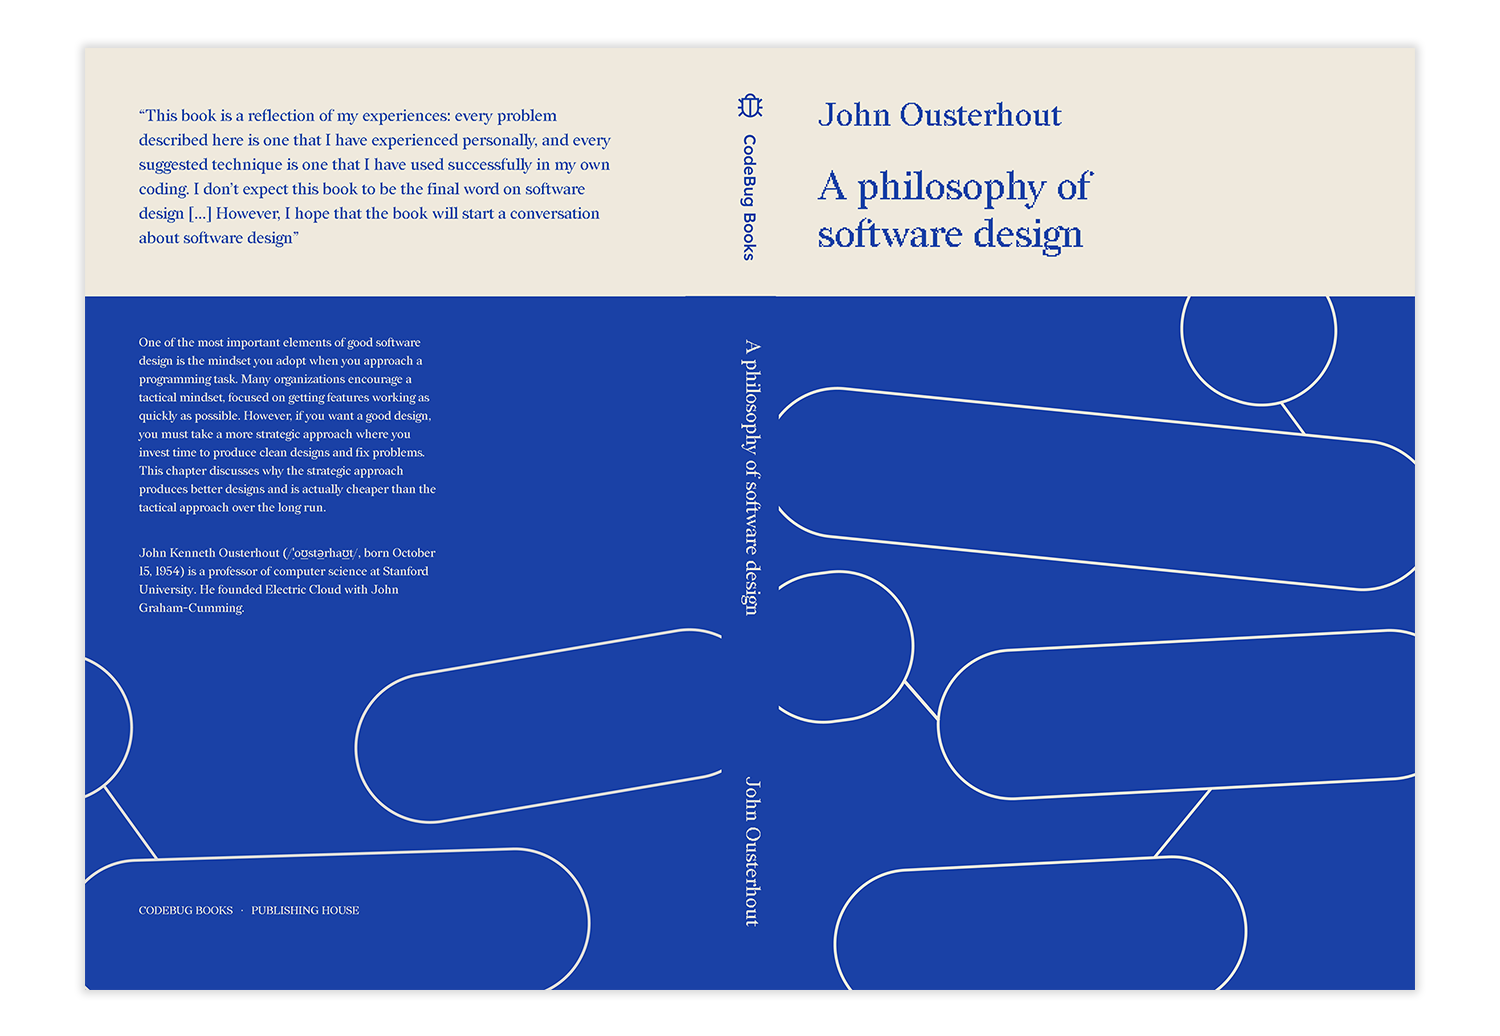 Cover design for "A Philosophy of Software Design". It is a vector design in electric blue and cream colors. It displays the front cover, spine, and back cover. On the front and back covers, there are rounded geometric shapes, resembling comet balloons, interconnected by lines, suggesting interconnected ideas.